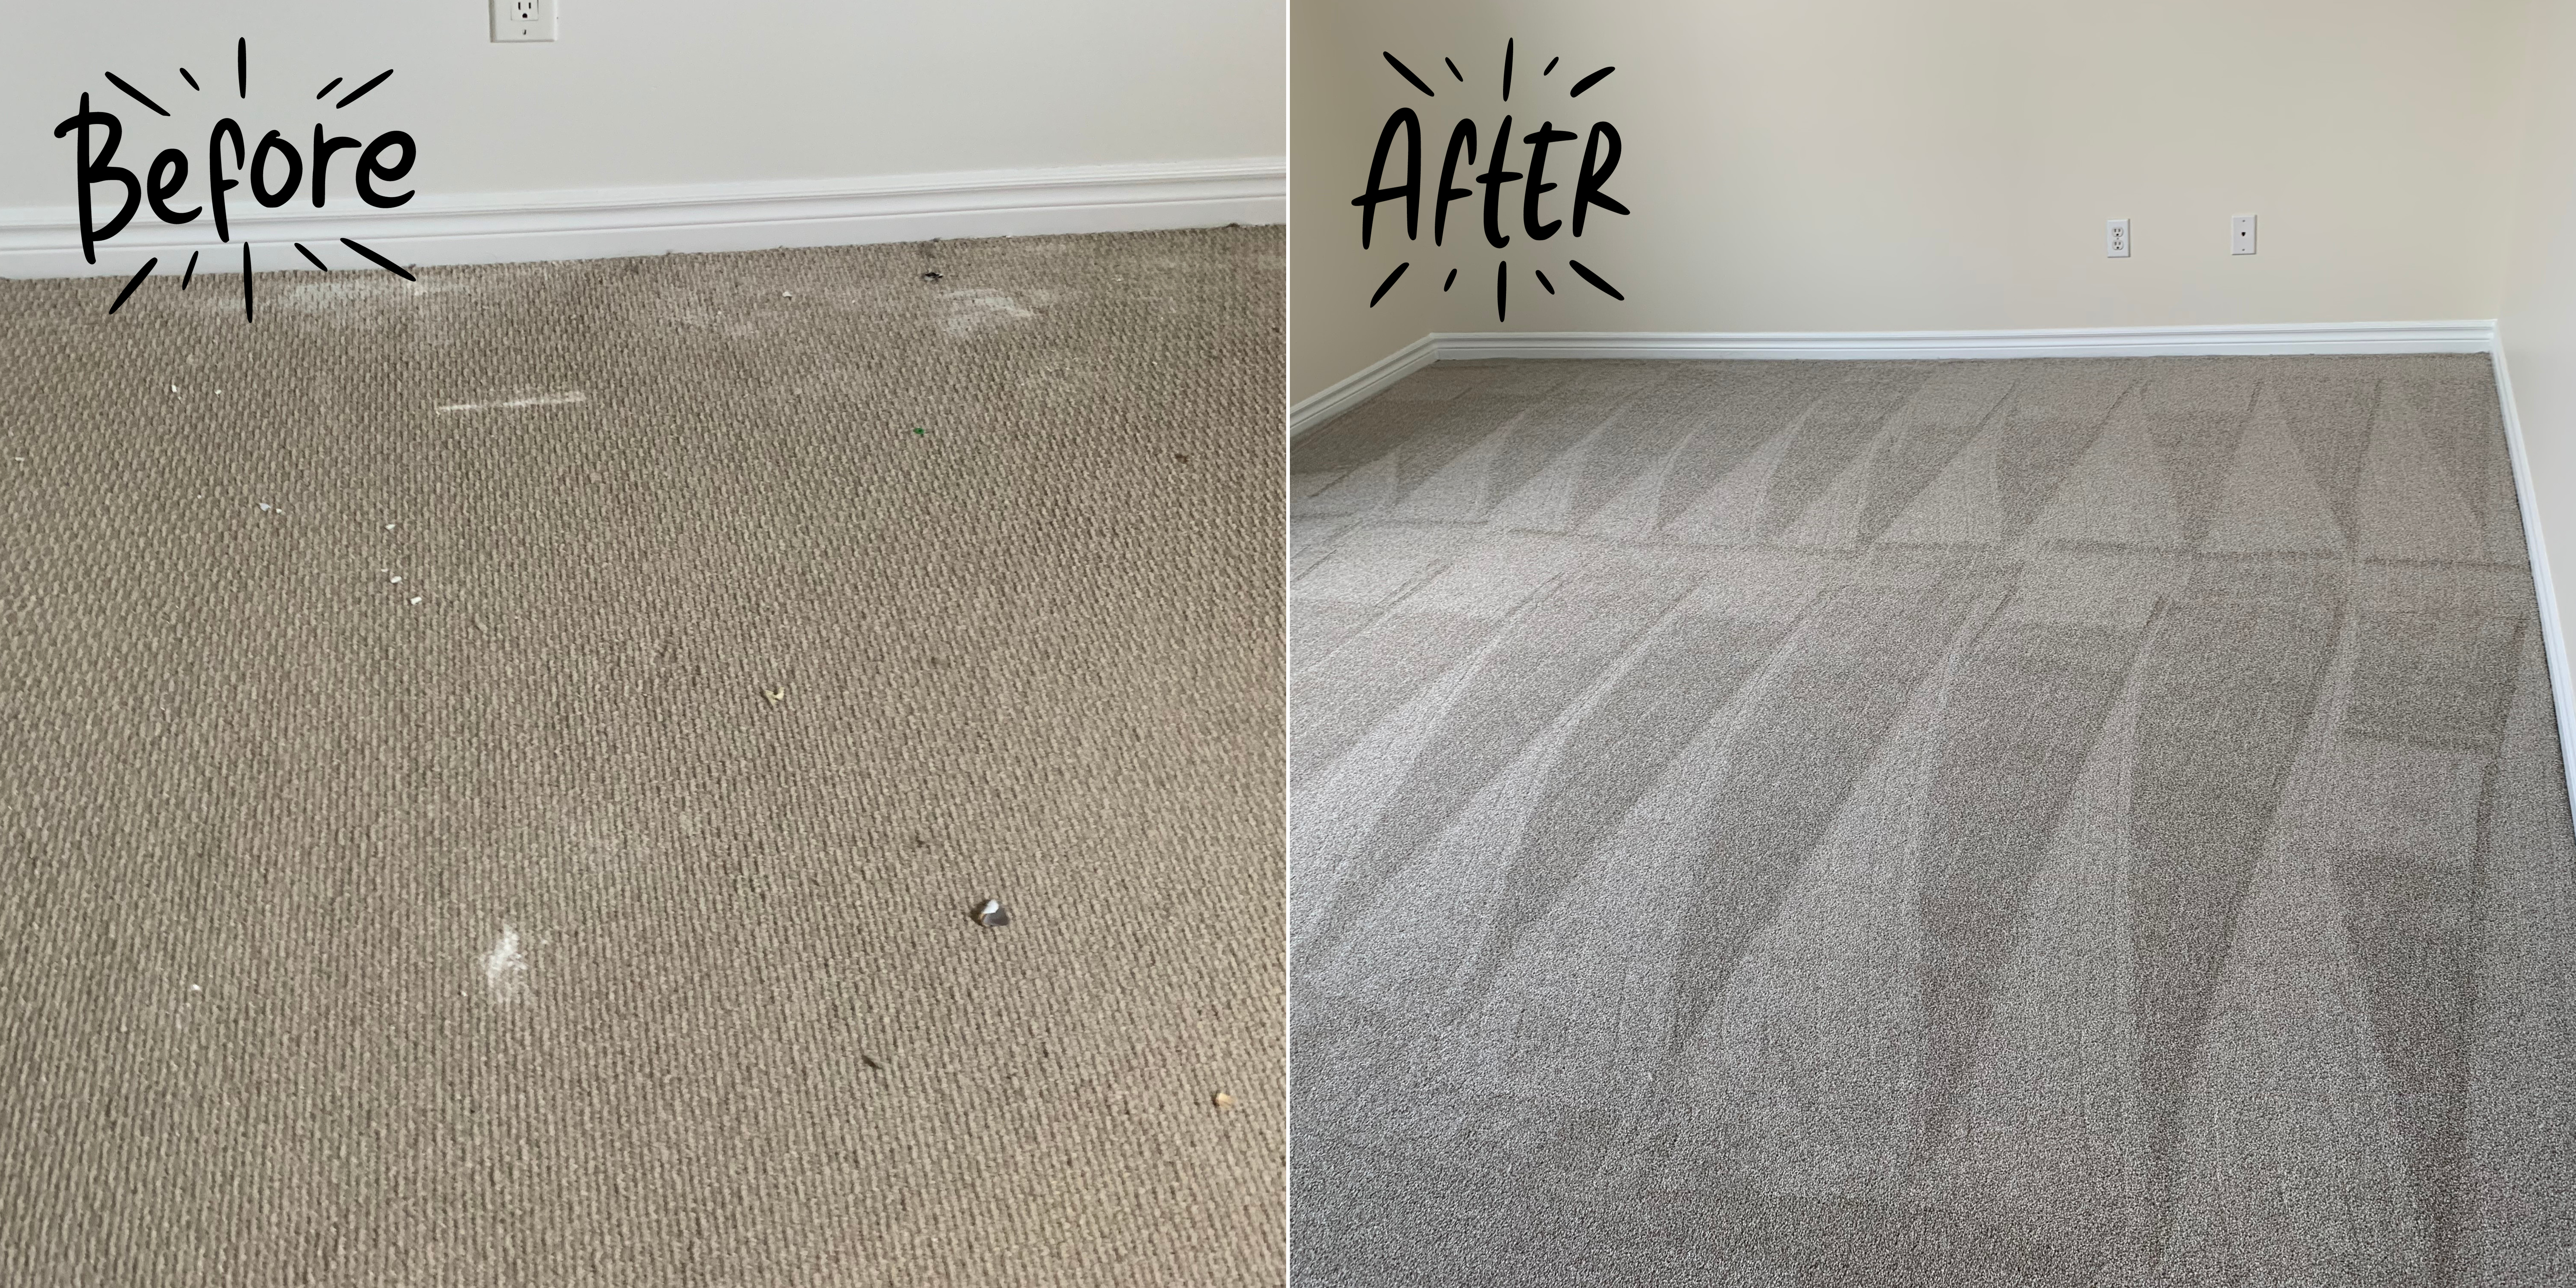 A before and after picture of the carpet in the room.